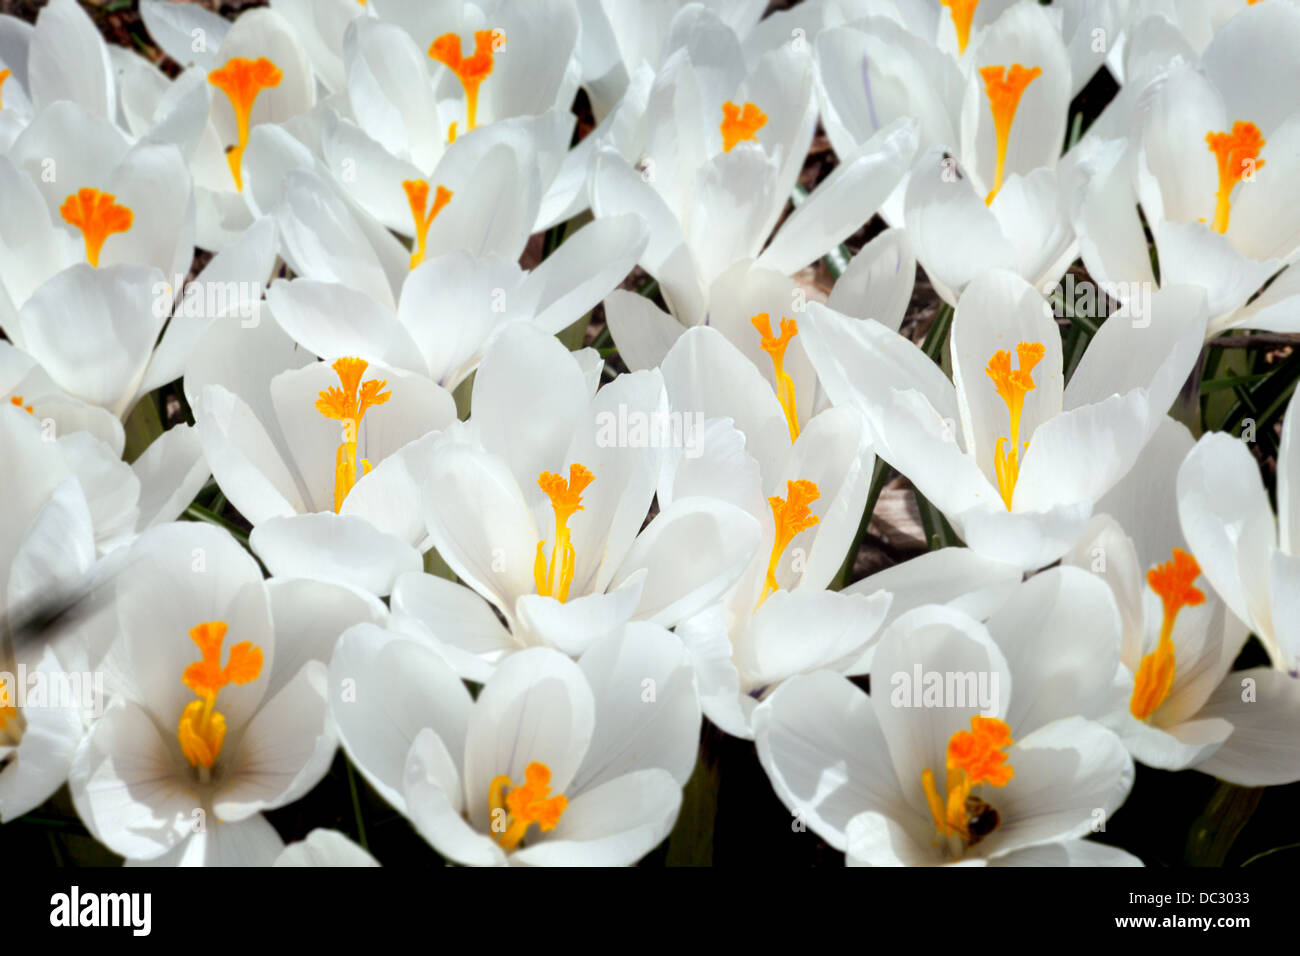 Field of white crocus blossoms with yellow stamens. Stock Photo